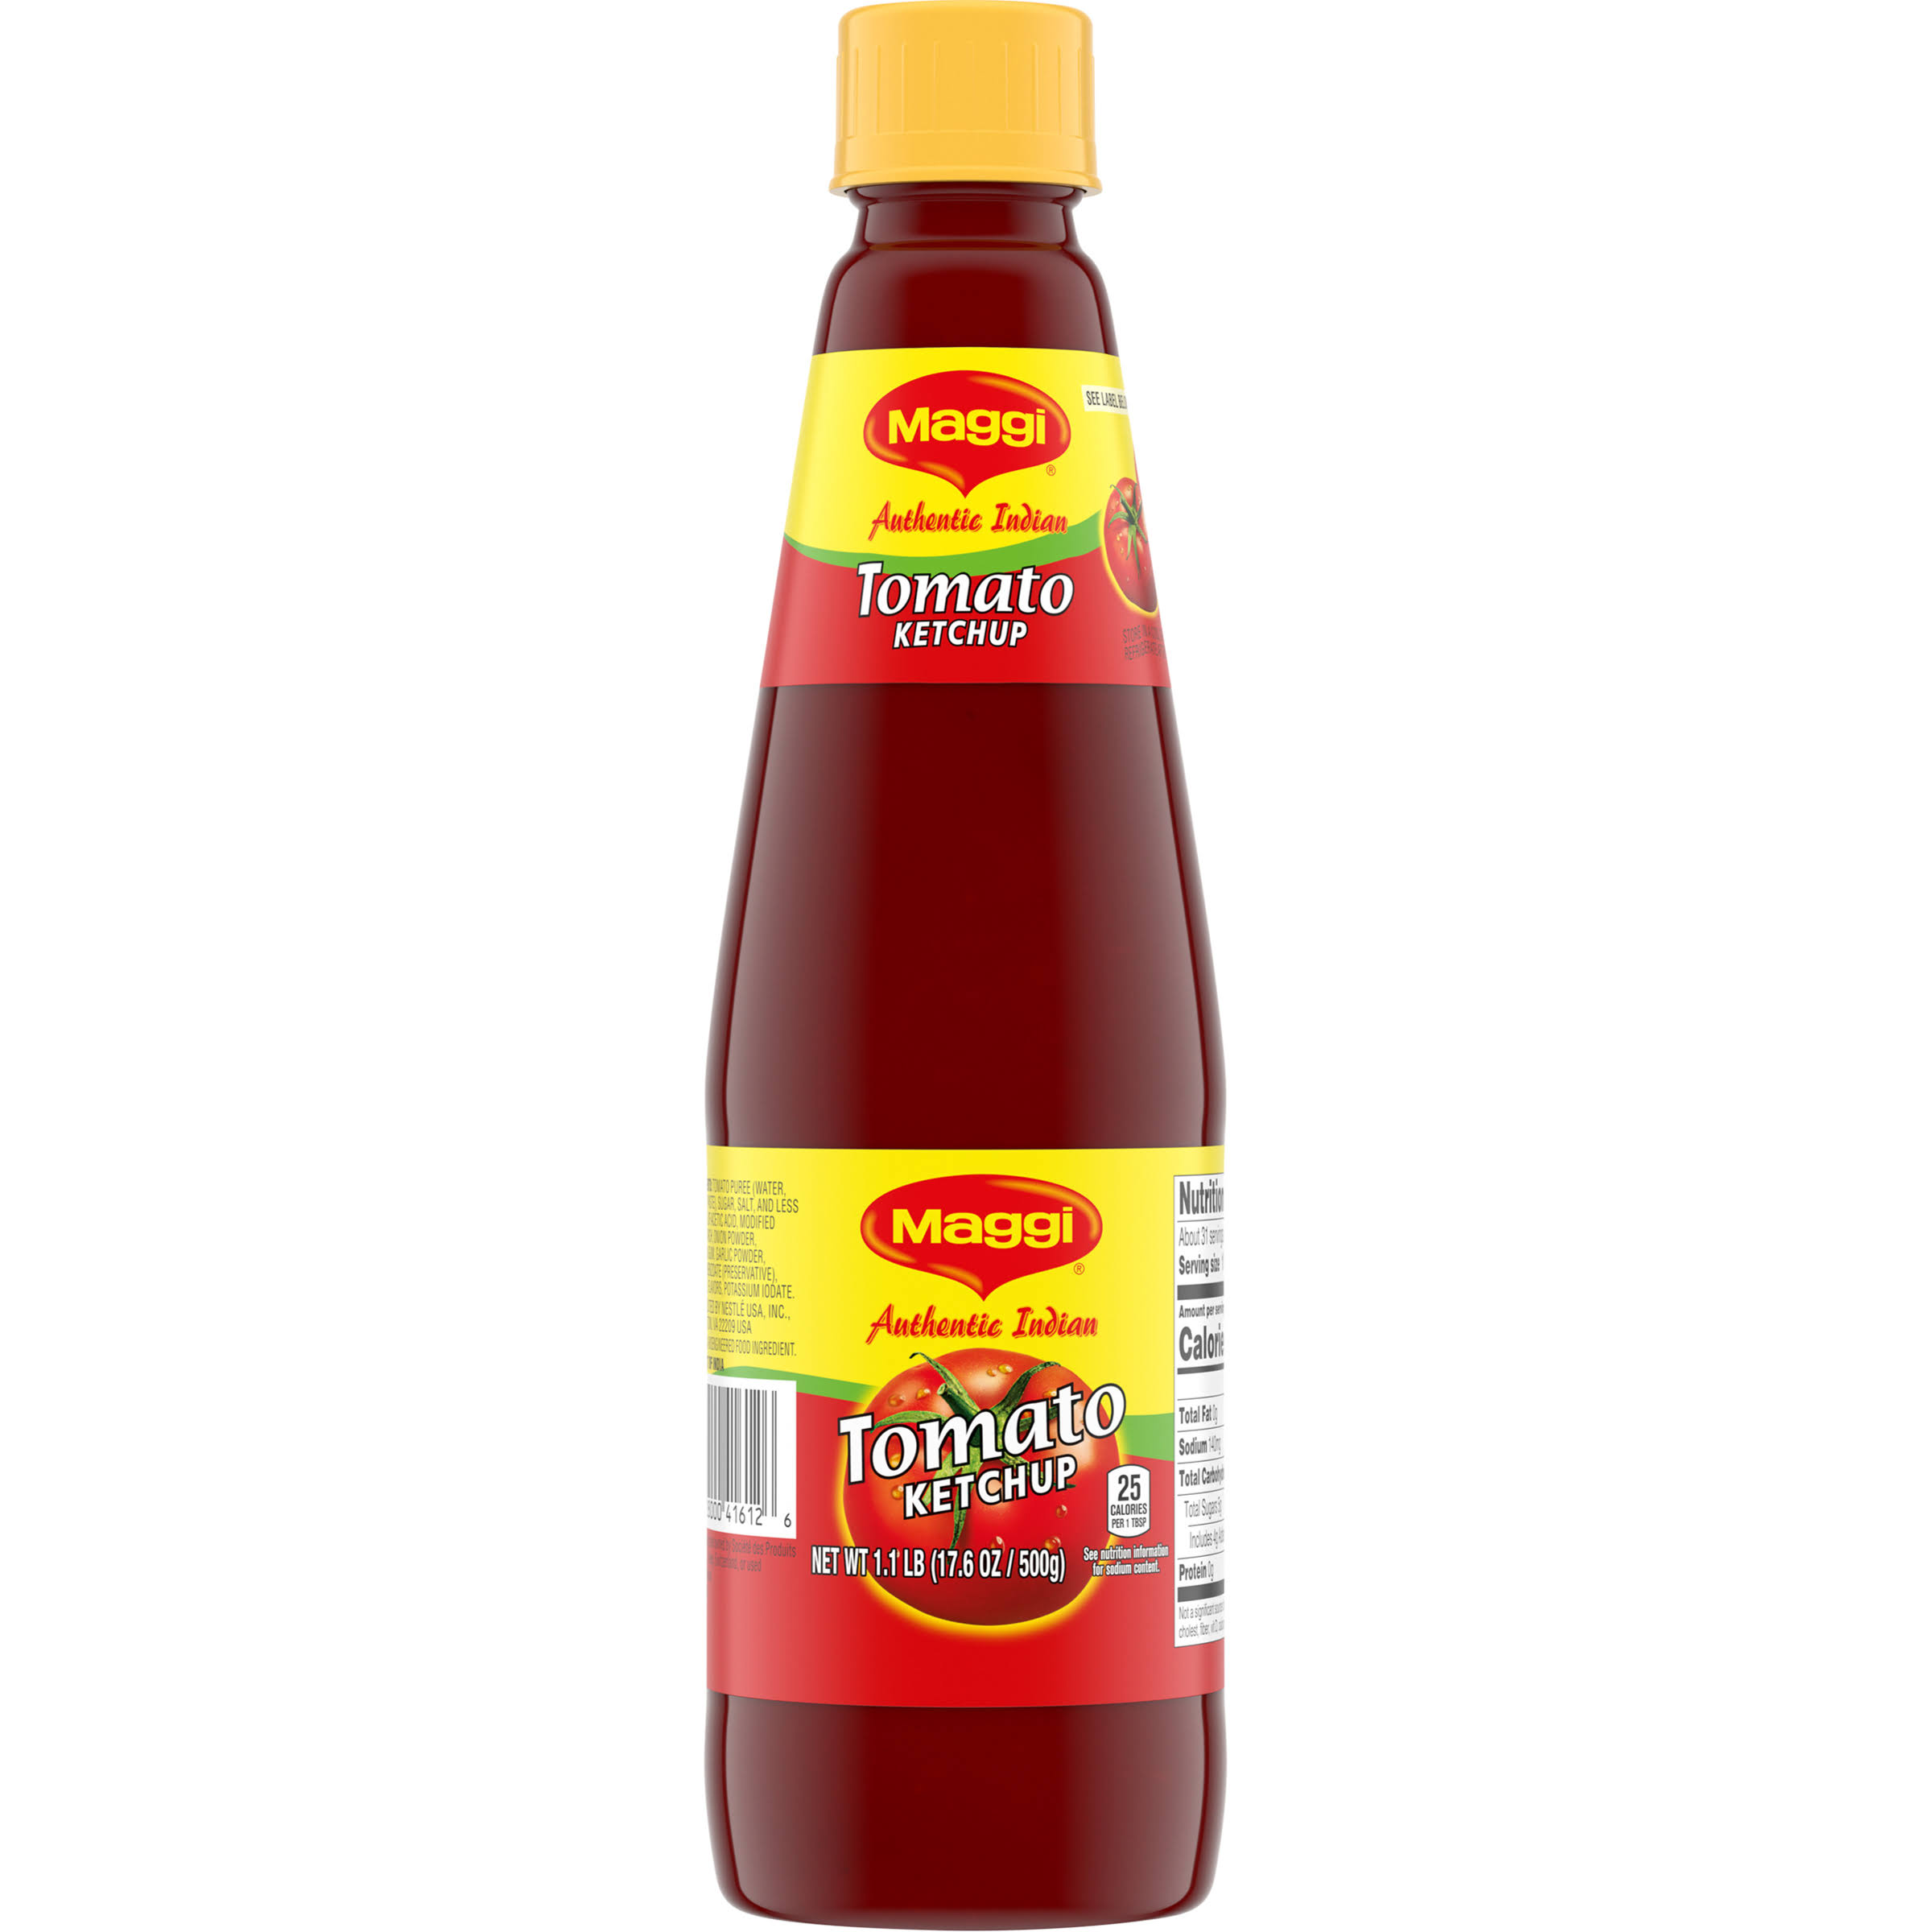 Maggi Tomato Ketchup, Authentic Indian - 1.1 lb